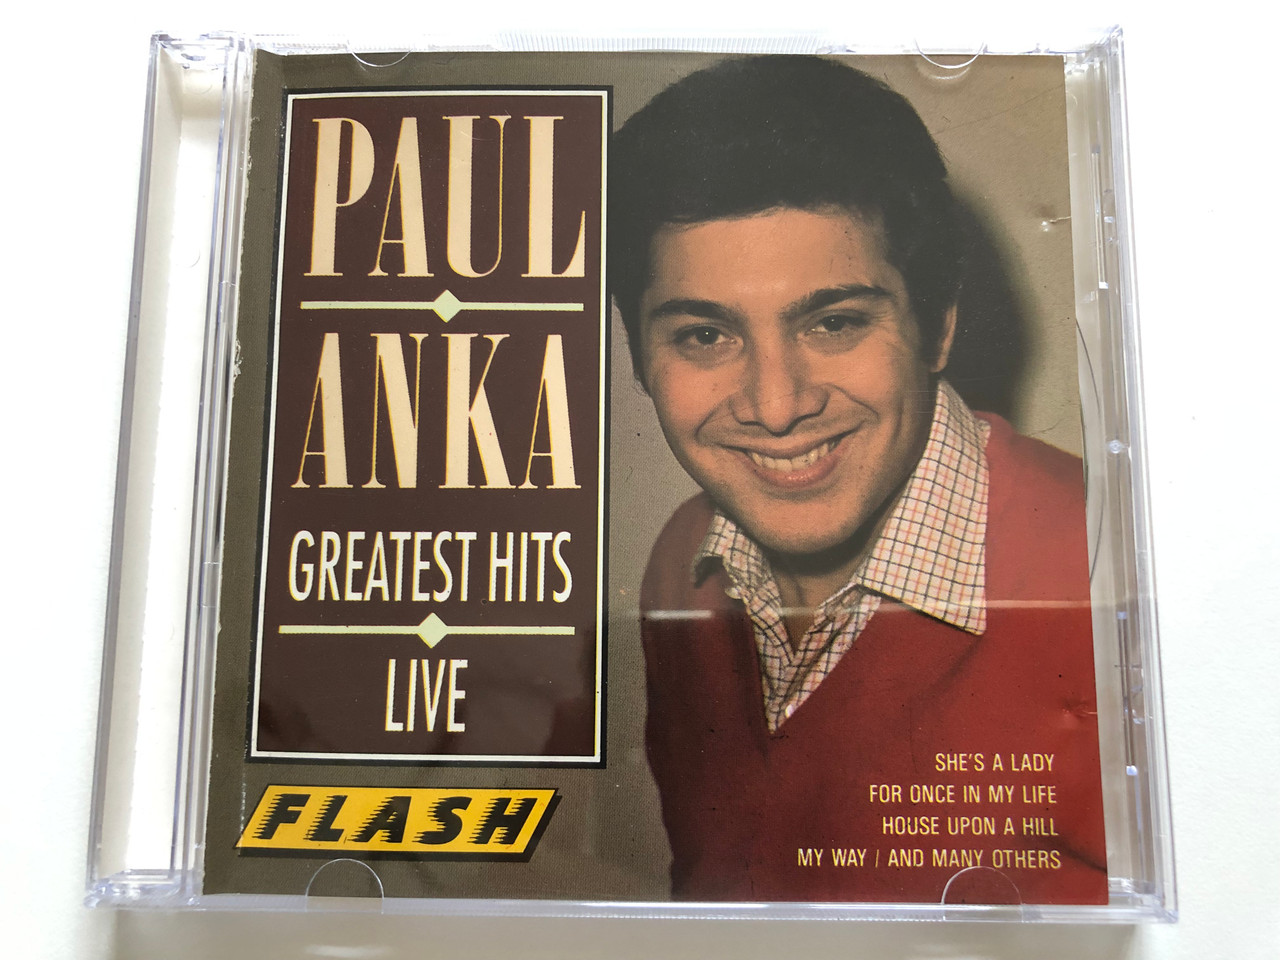 https://cdn10.bigcommerce.com/s-62bdpkt7pb/products/30710/images/181344/Paul_Anka_Greatest_Hits_Live_Shes_A_Lady_For_Once_In_My_Life_House_Upon_A_Hill_My_Way_And_Many_Others_Flash_Audio_CD_Stereo_F_2135-2_1__78741.1623742758.1280.1280.JPG?c=2&_ga=2.171687462.787544708.1623769862-1646000393.1623769862